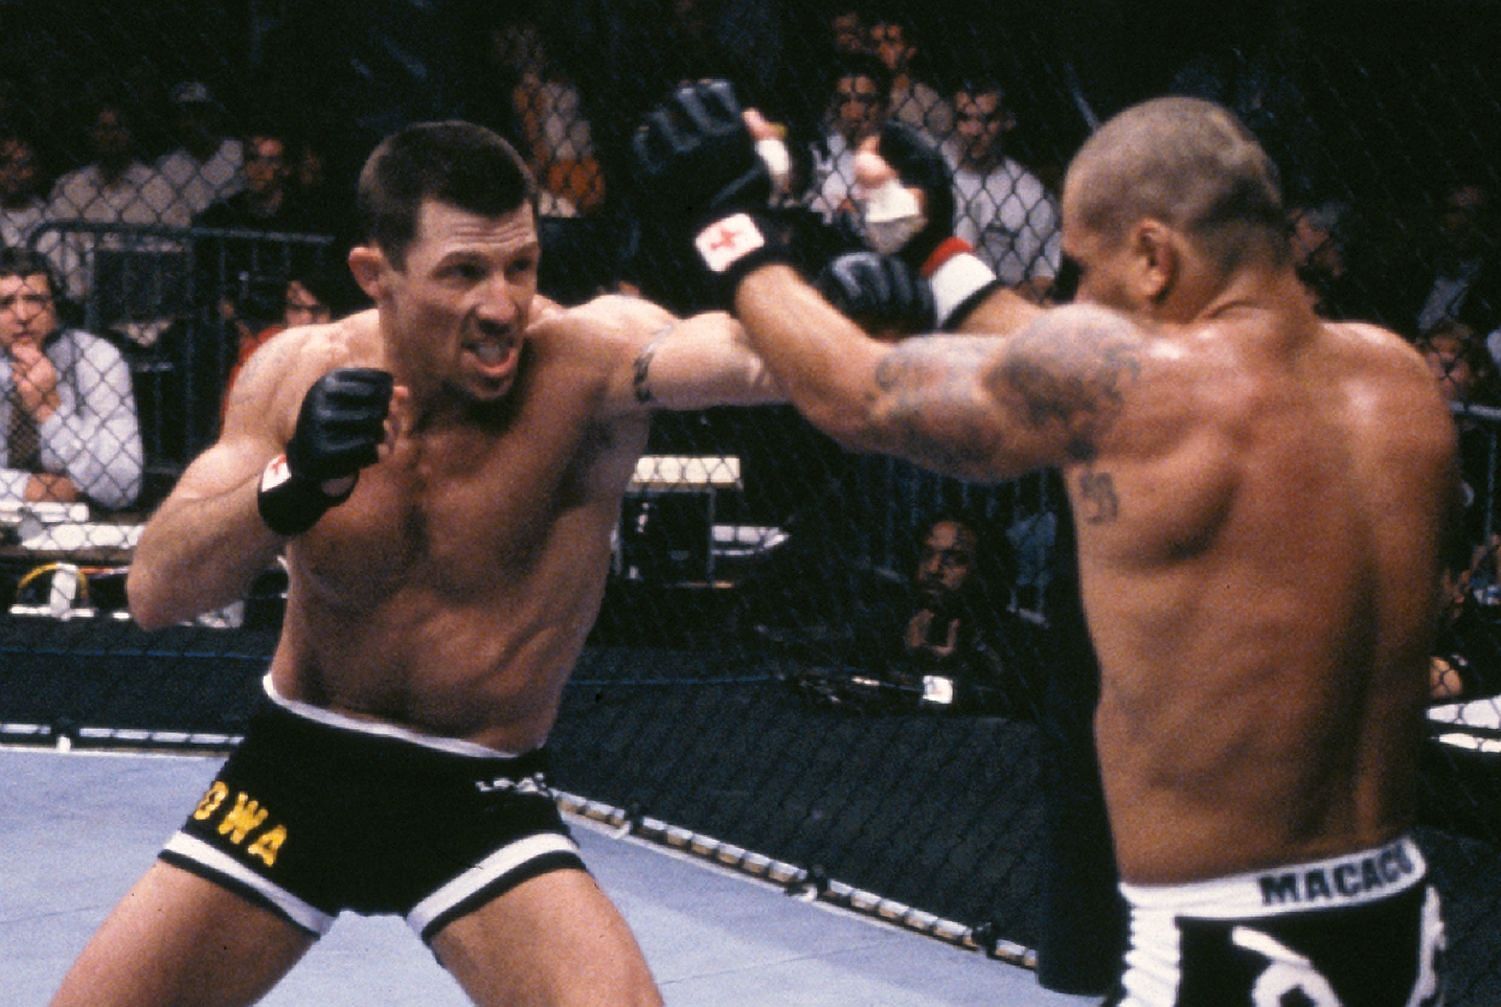 Pat Miletich (left) was the first ever UFC welterweight champion